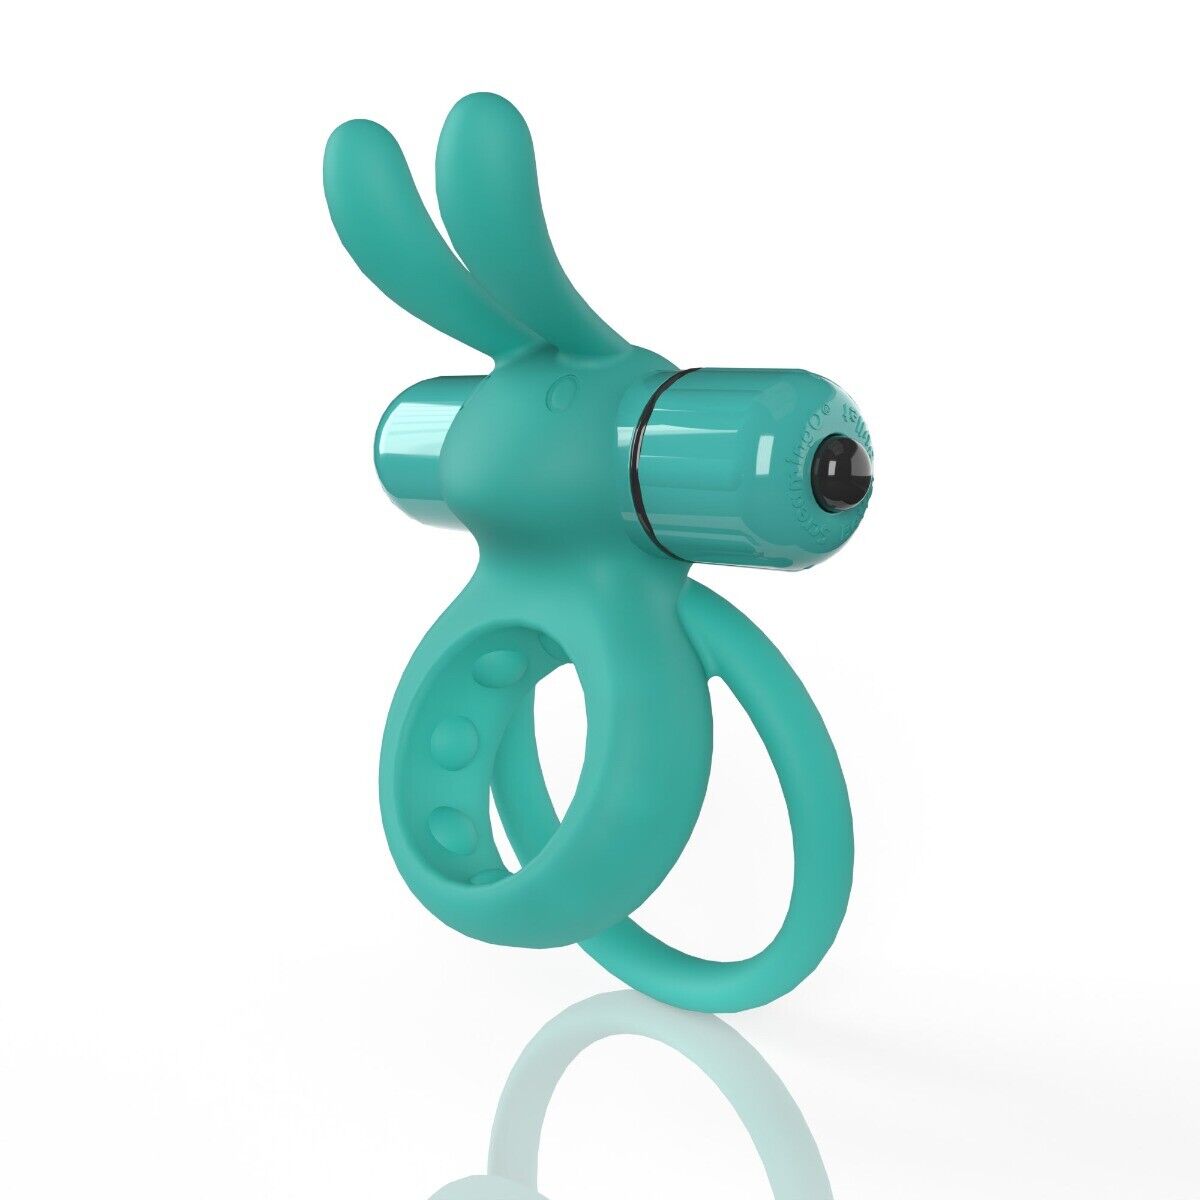 Screaming O 4T Ohare Vibrating Silicone Rabbit Double Penis Cock Ring